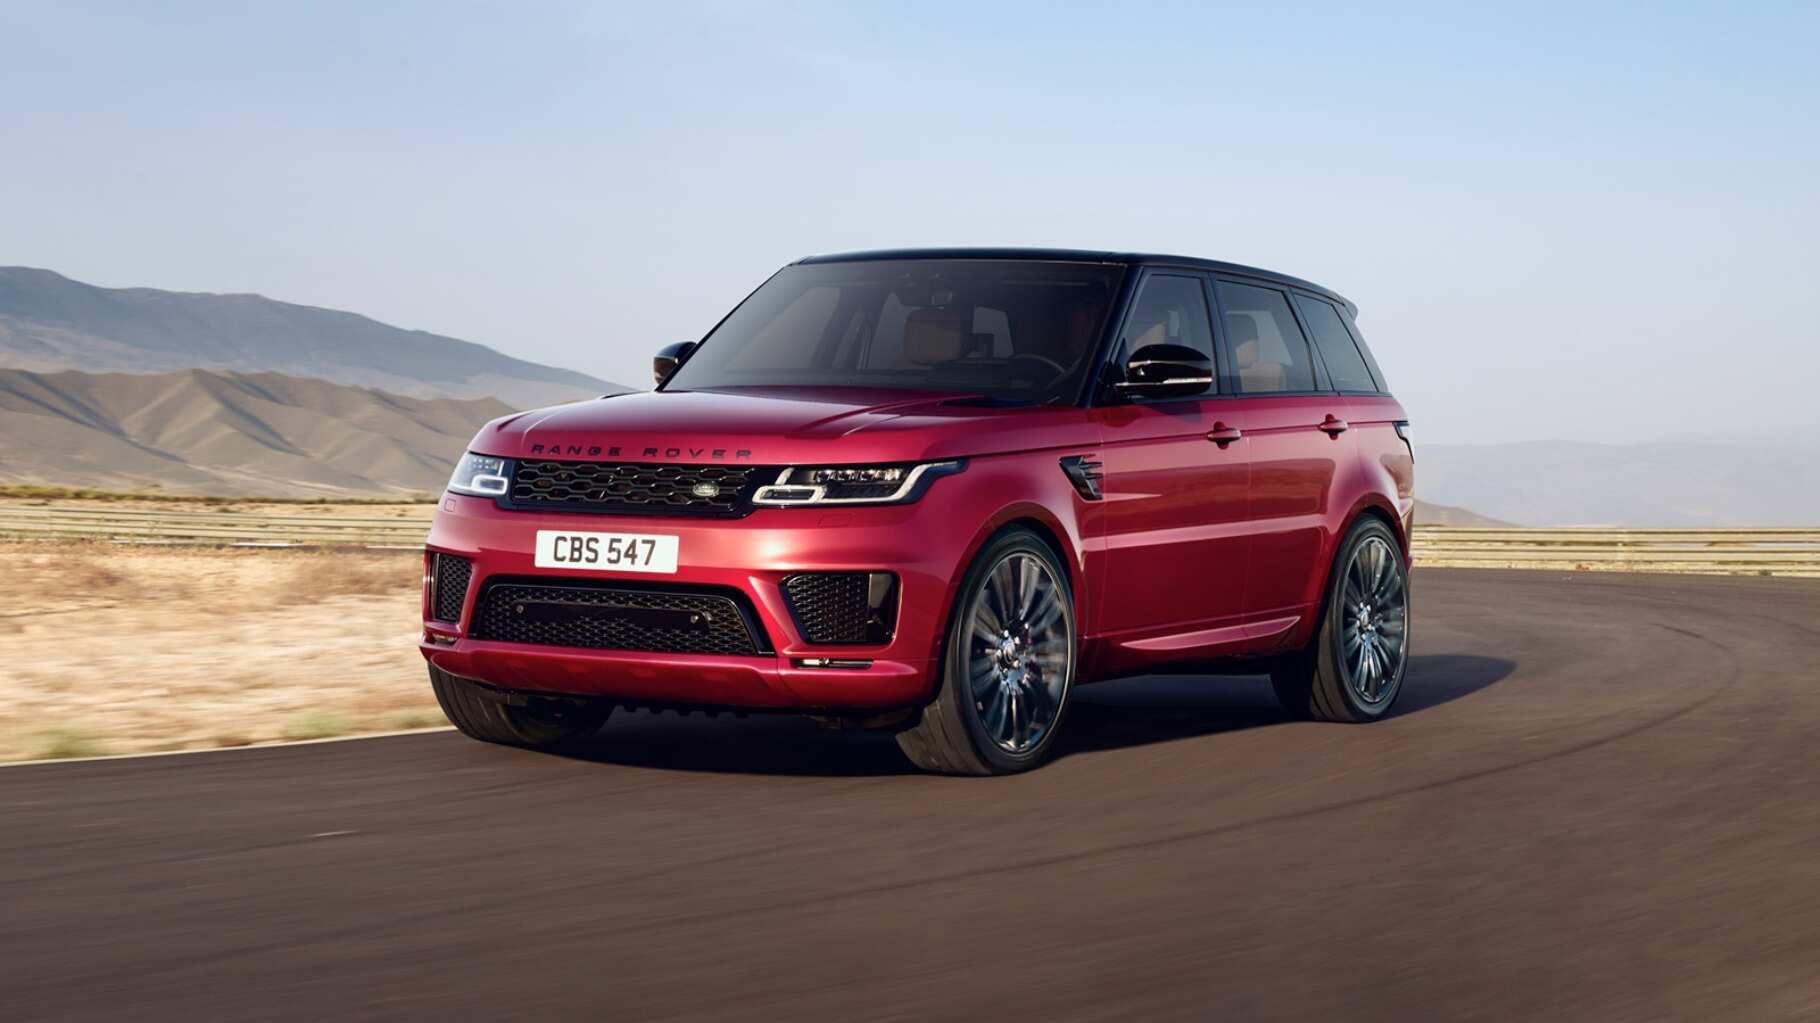 A range of potent powertrains deliver breathtaking on-road performance.